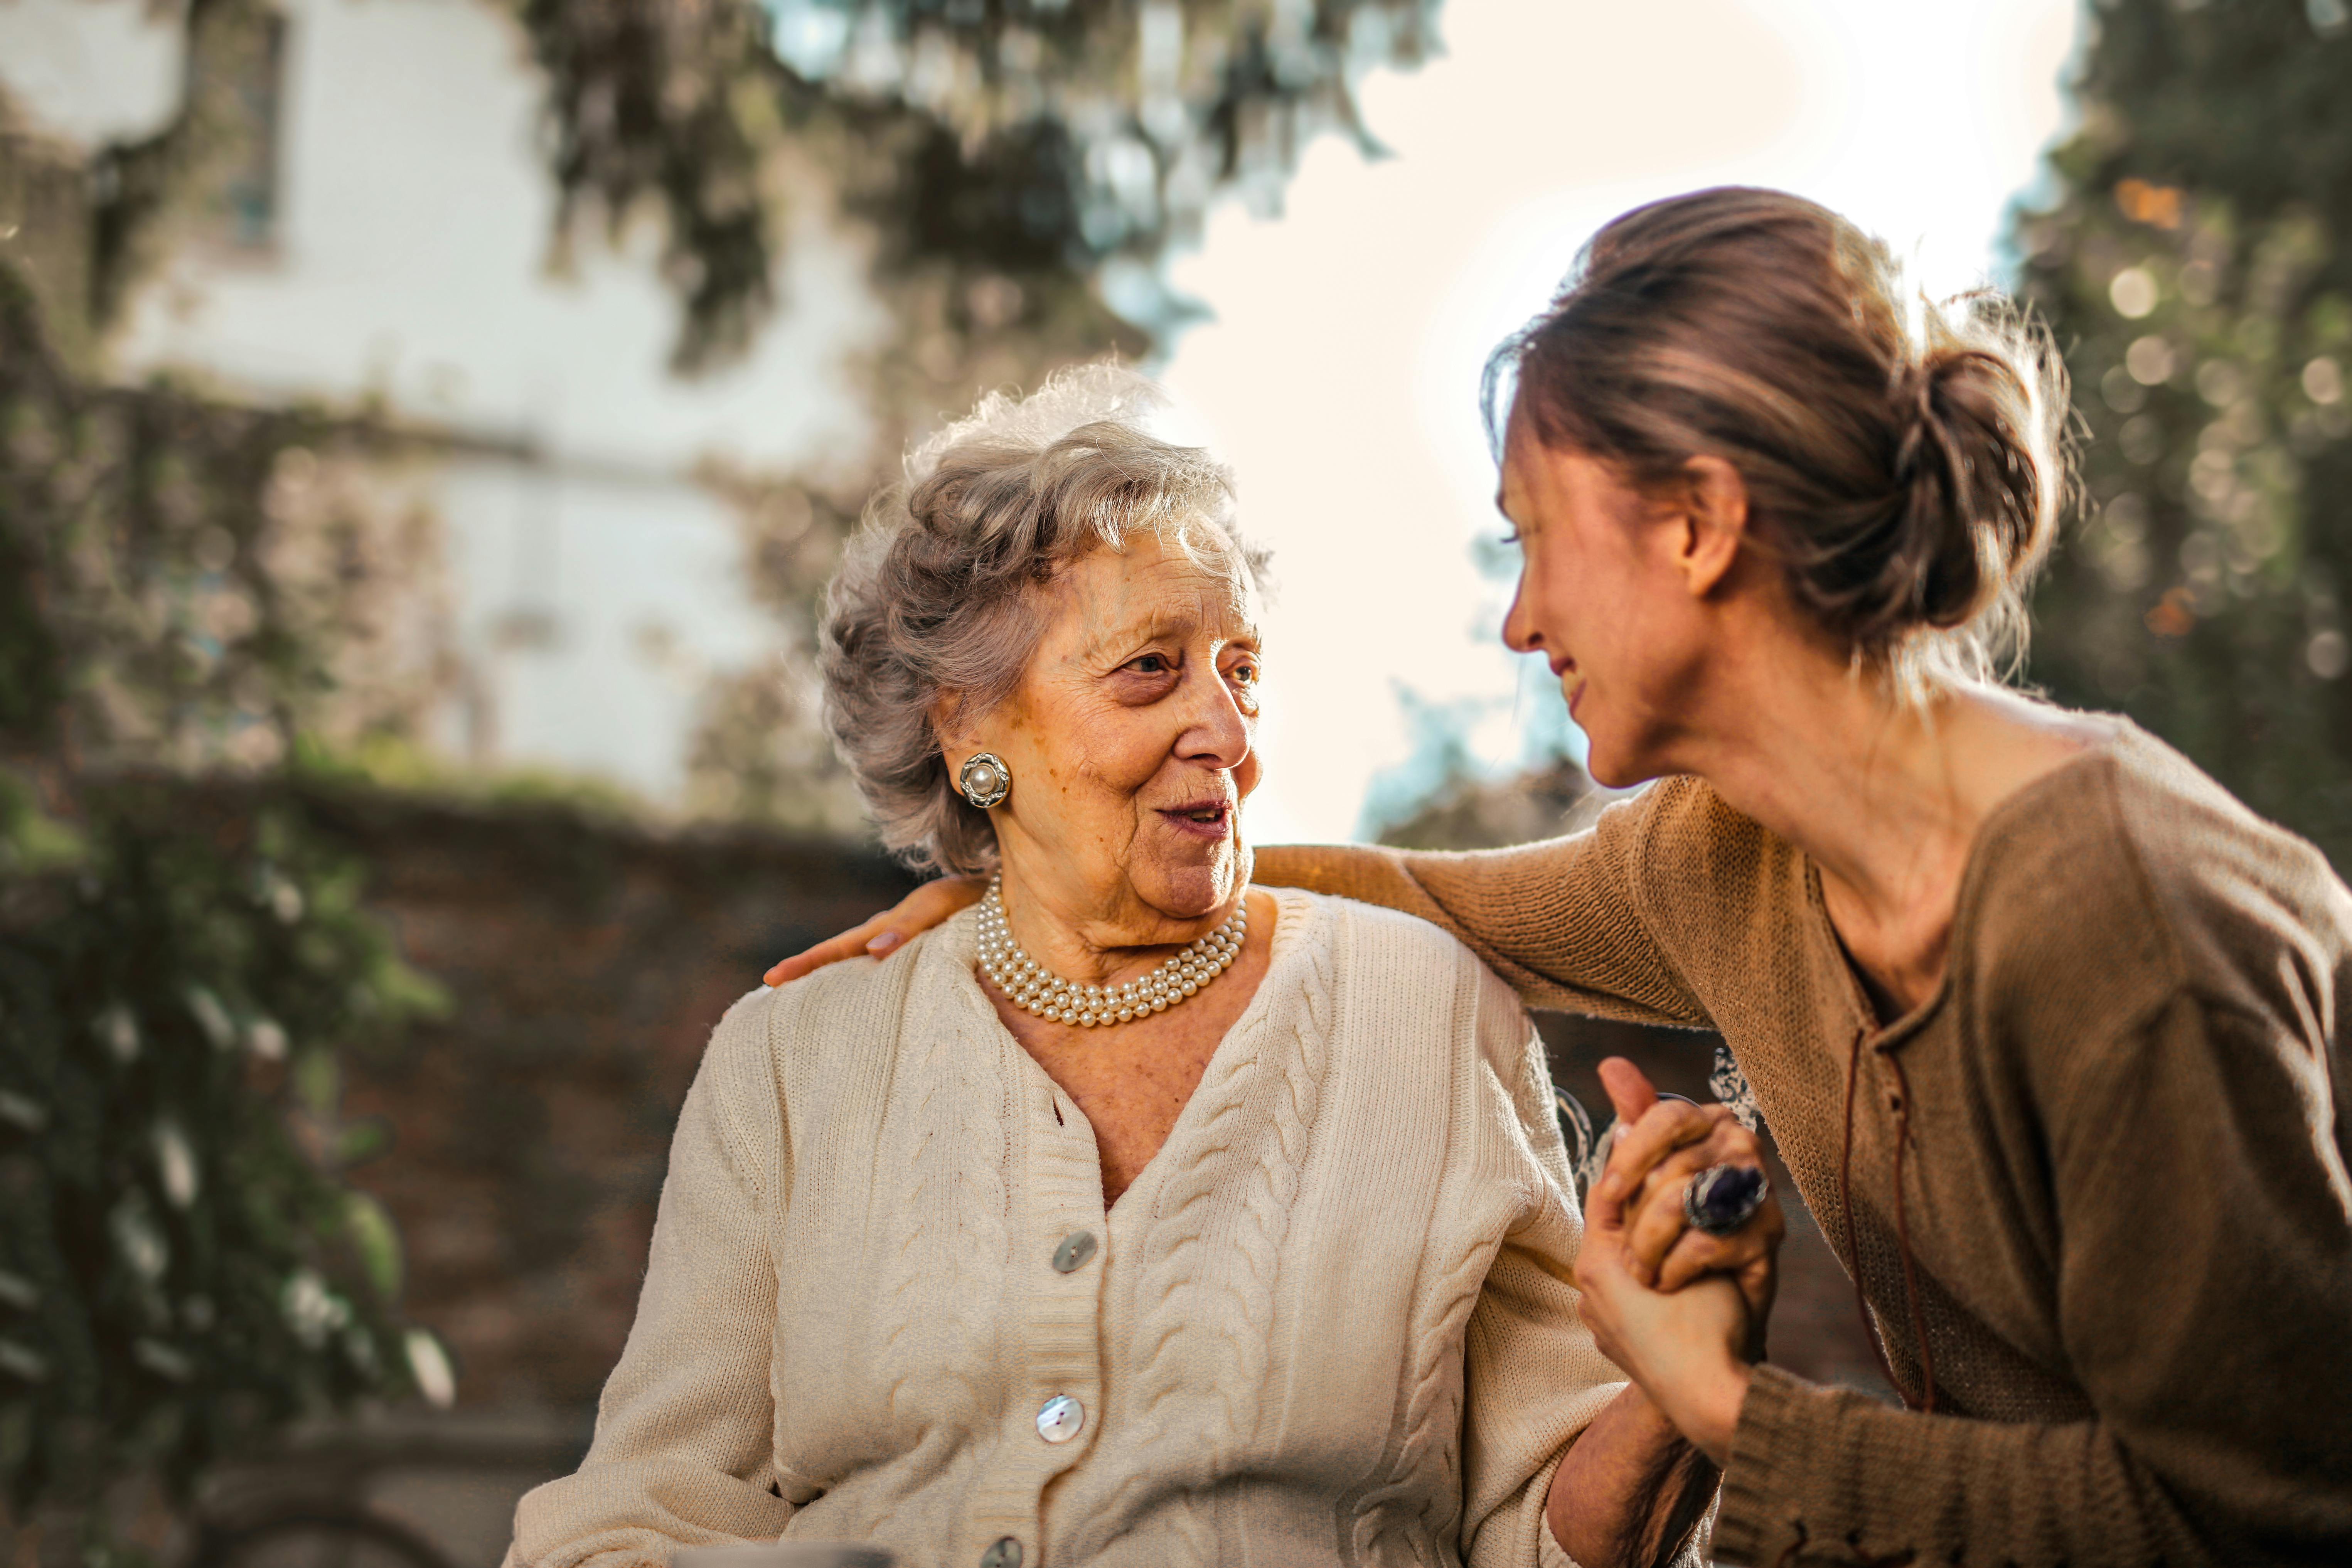 Two women talking and getting along. For illustration purposes only | Source: Pexels